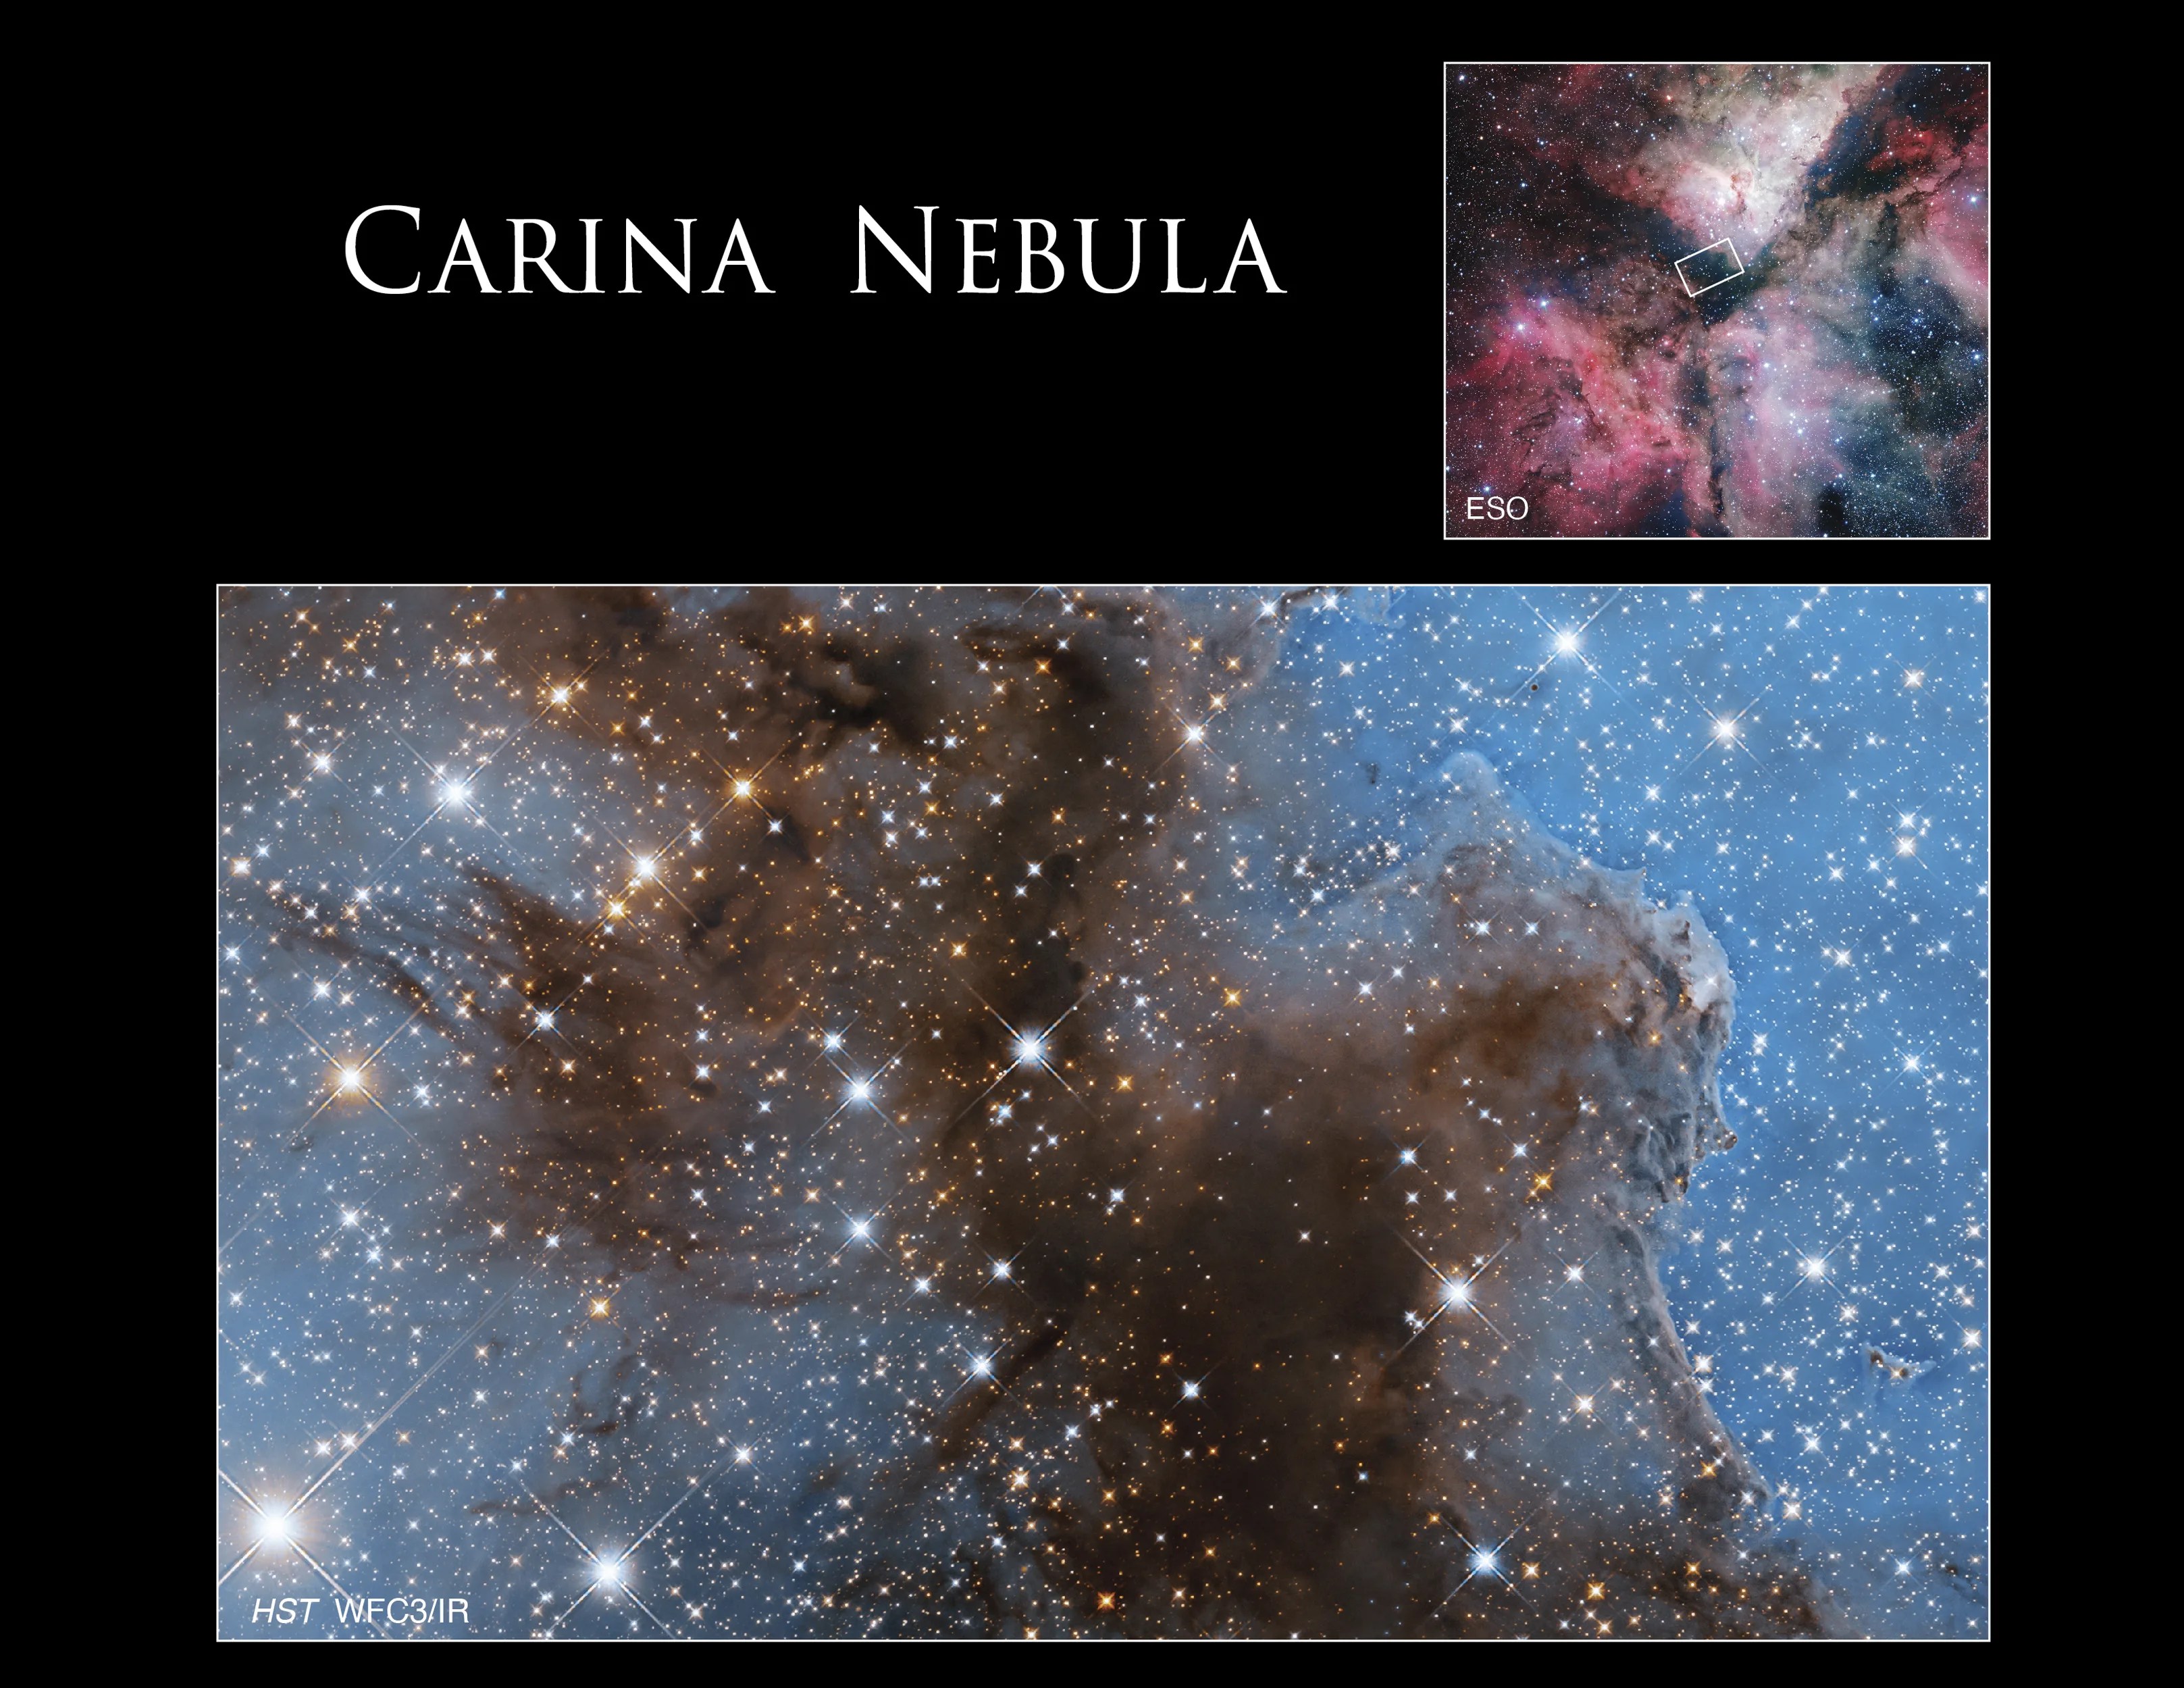 Bottom two-thirds: Dark, reddish-brown cloud fills the scene. Blue background is dotted with bright-white and yellow-orange stars. Upper right: Small inset image pink-red, white, and blue clouds. Black background with white stars.